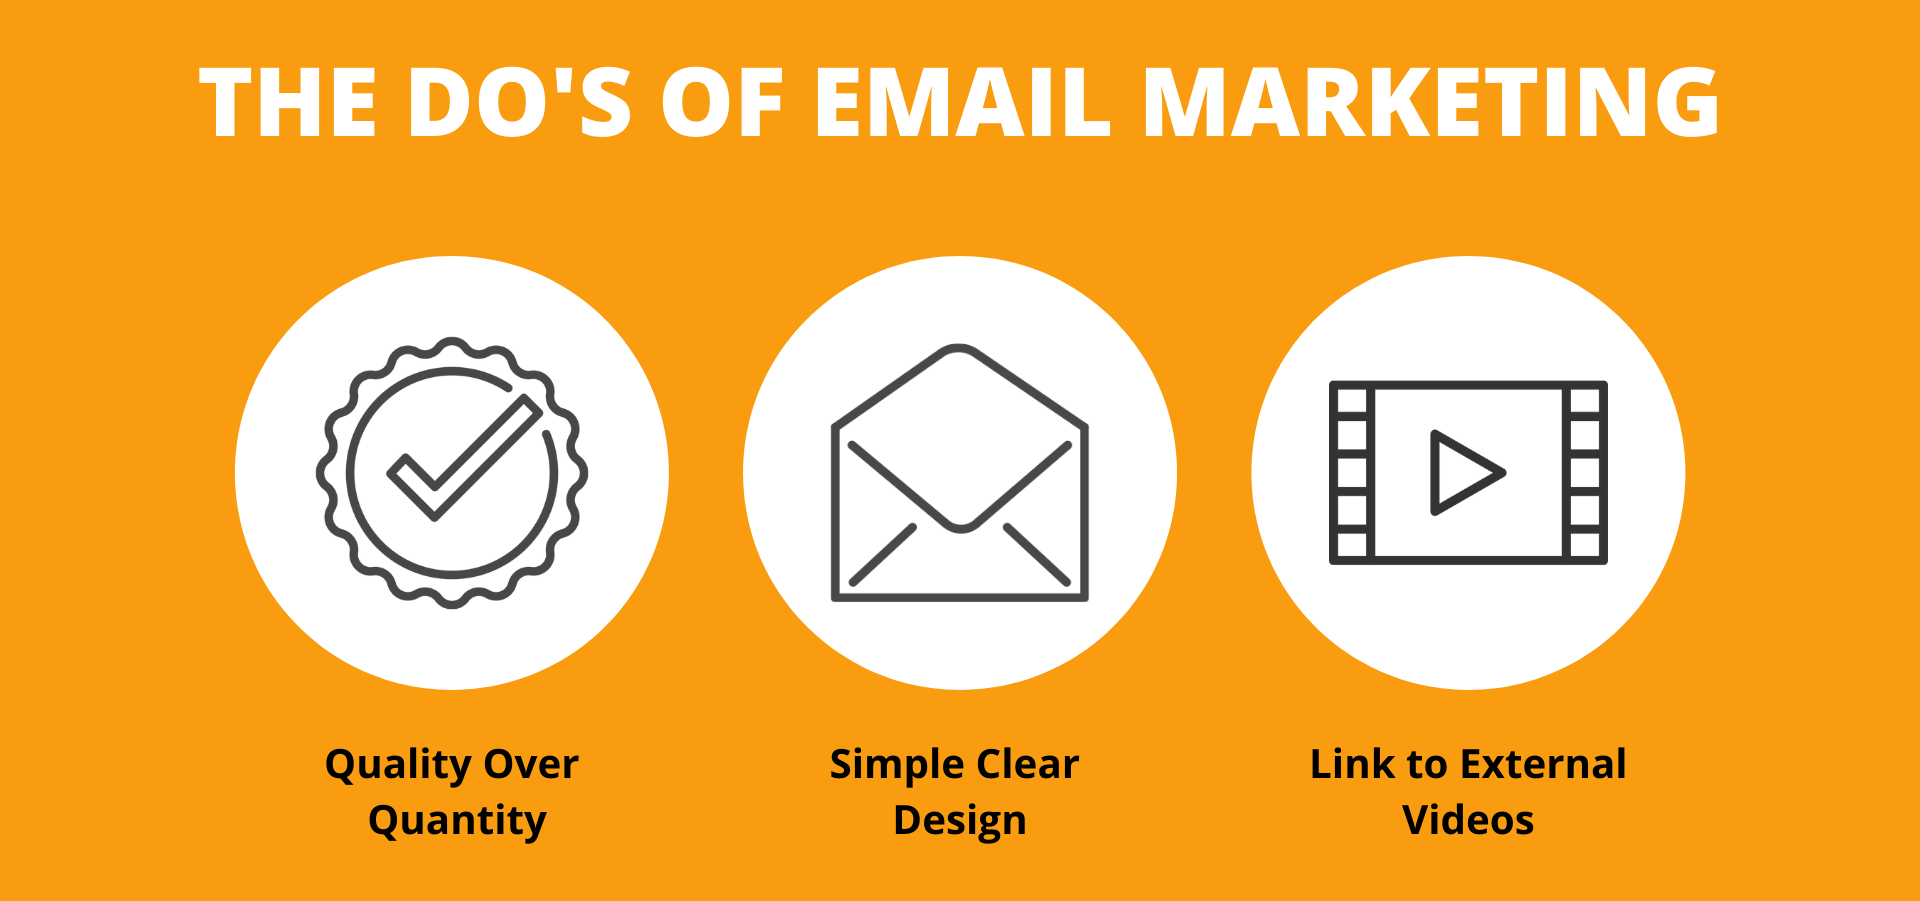 The Do's of Email Marketing